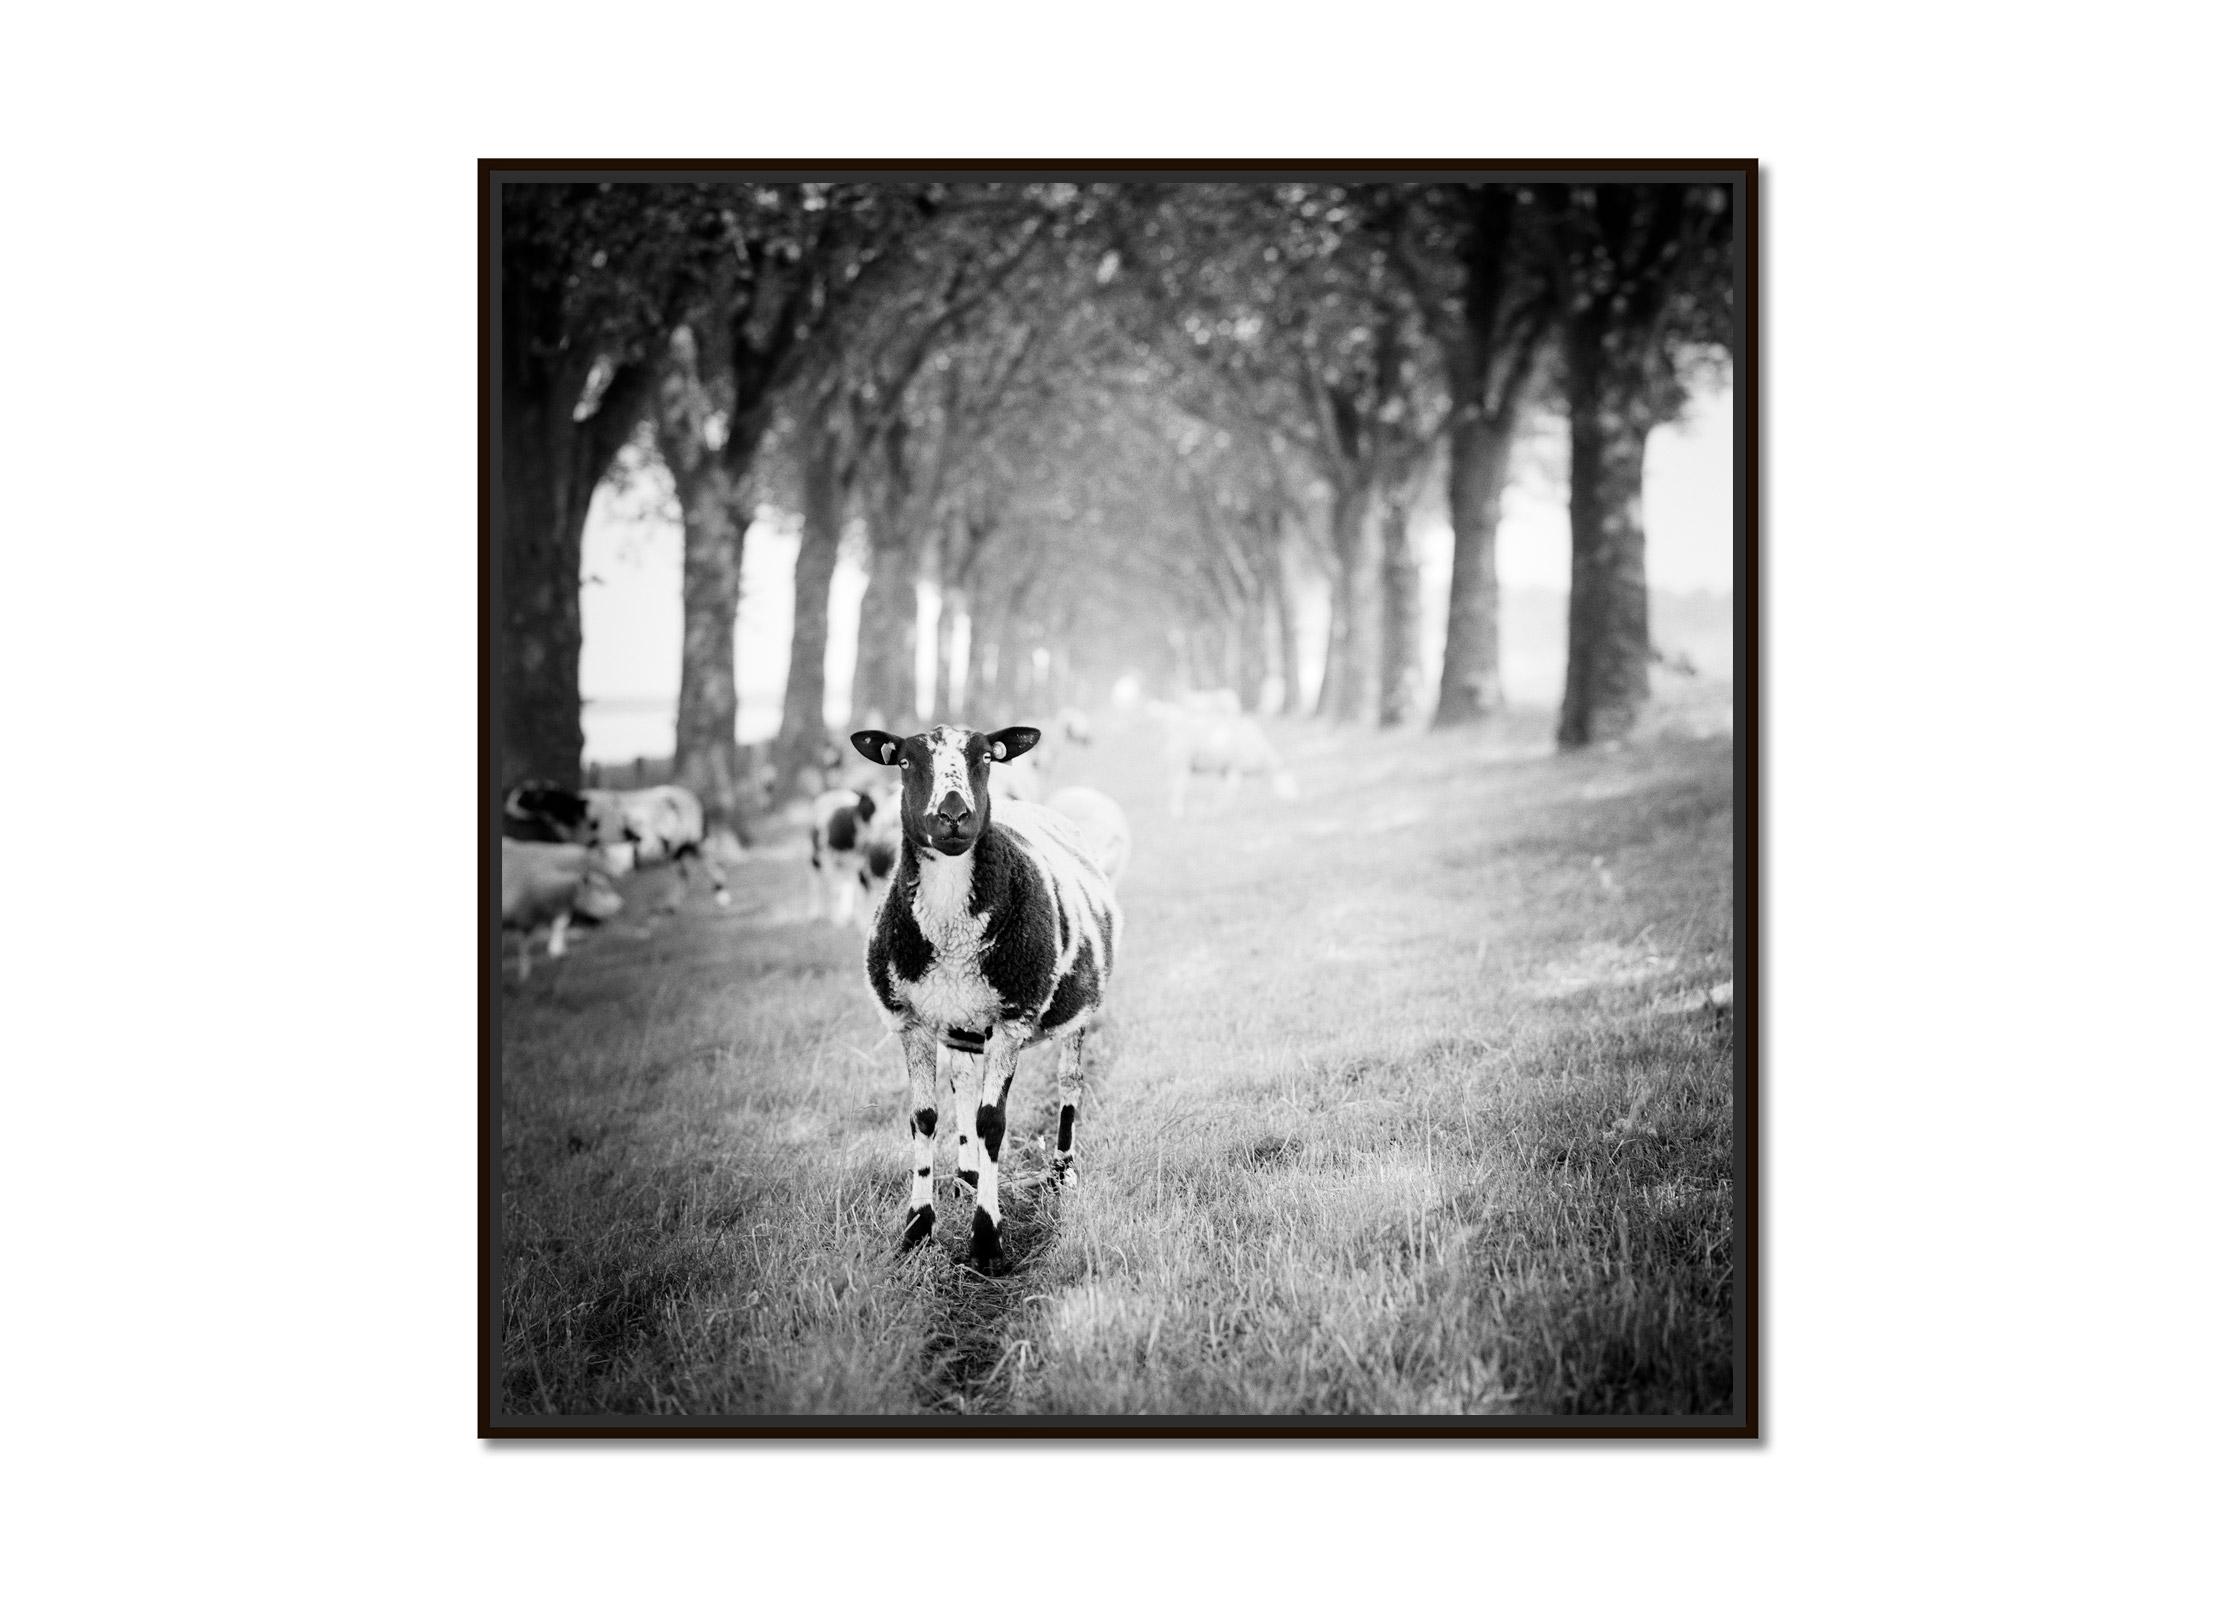 Shaun the Sheep, tree avenue, black and white fine art landscape photography - Photograph by Gerald Berghammer